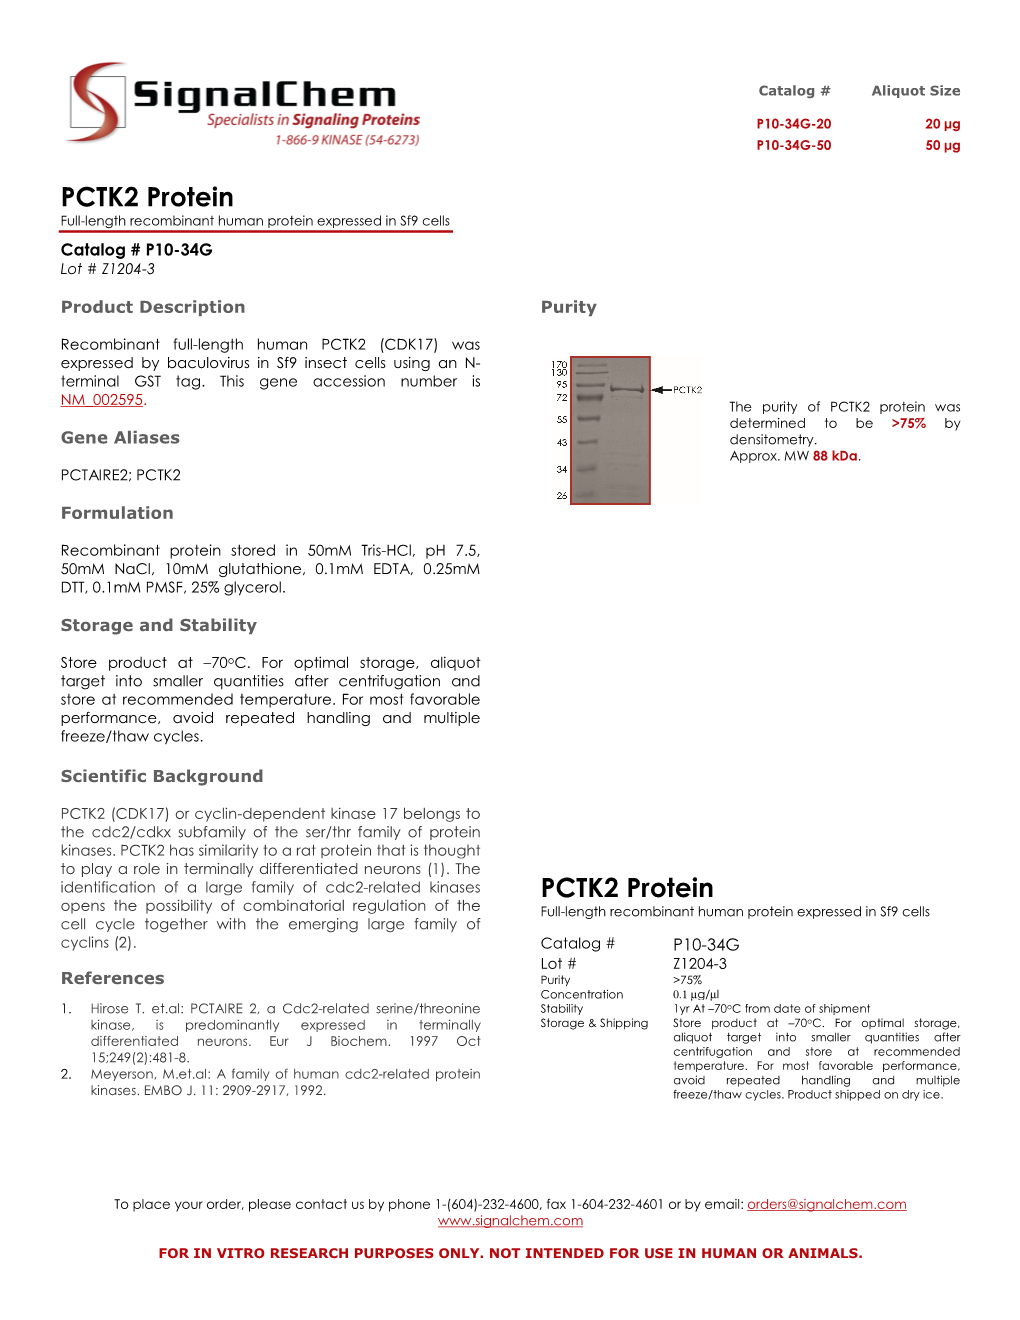 PCTK2 Protein Full-Length Recombinant Human Protein Expressed in Sf9 Cells